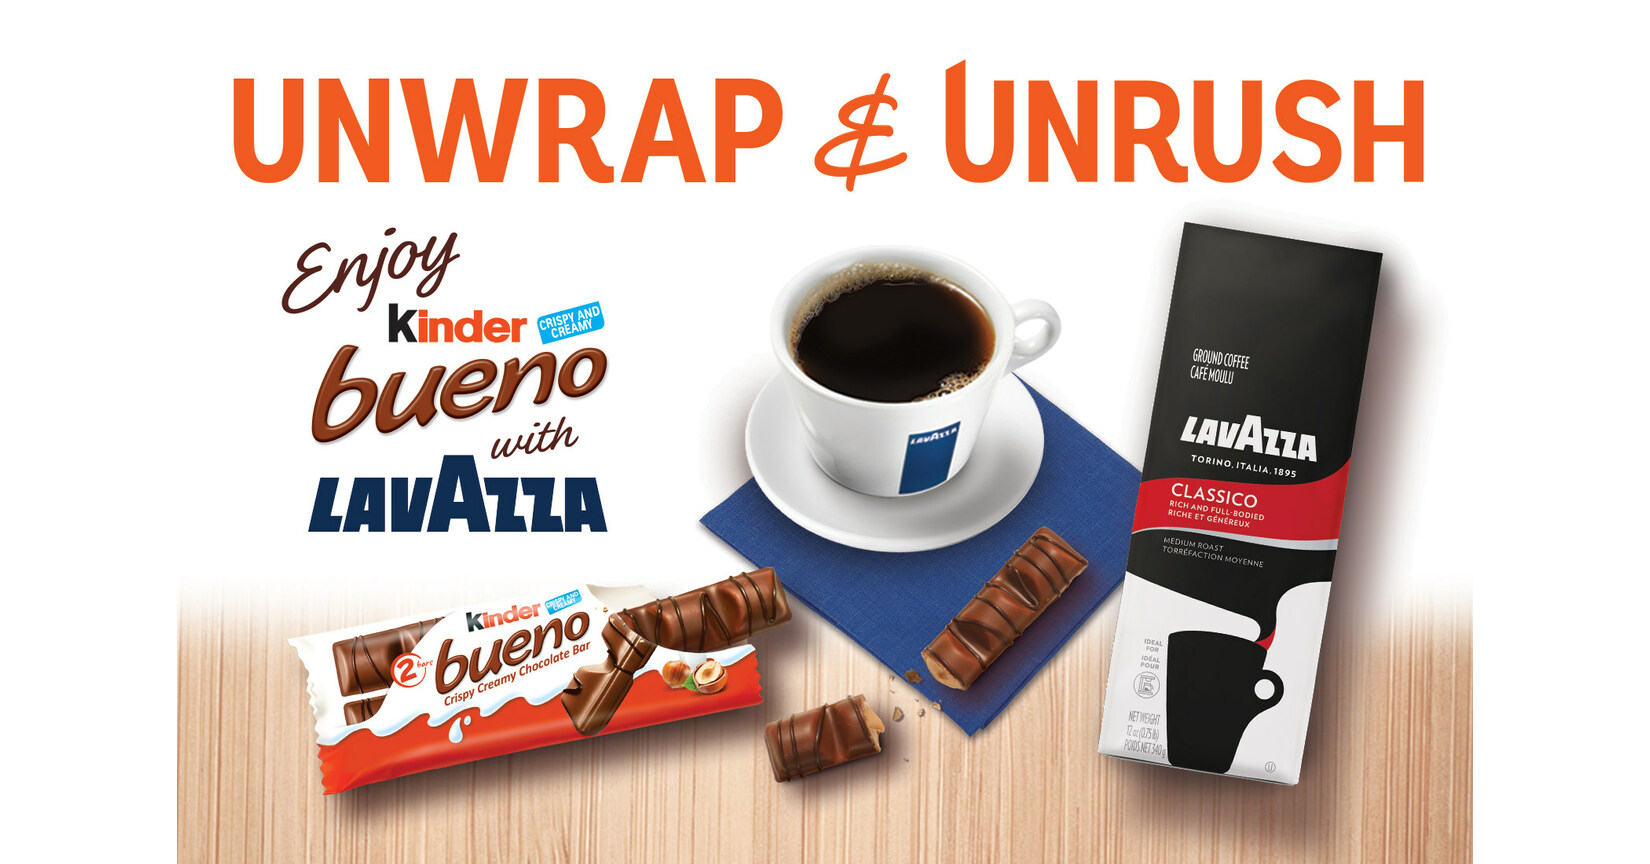 The Perfect Blend: Kinder Bueno® and Lavazza Join Forces to